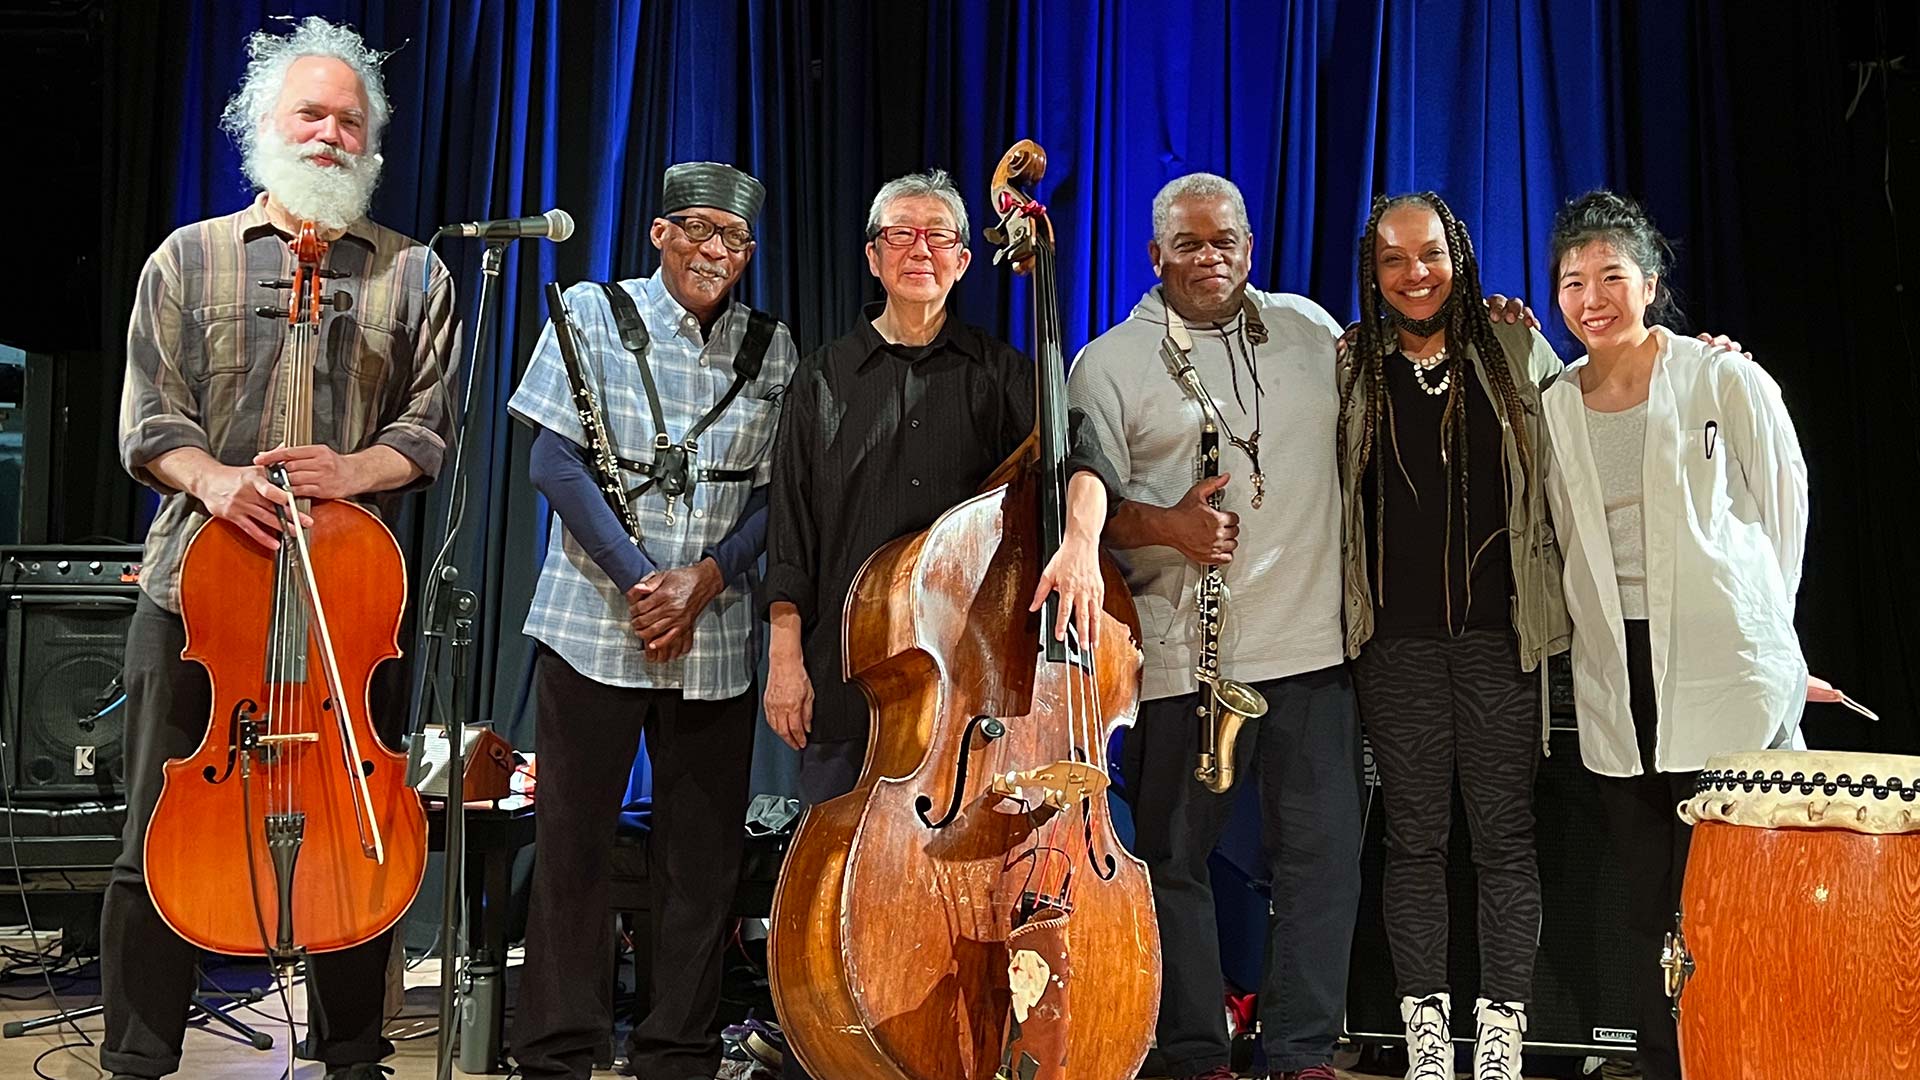 Six members of the MIYUMI Project ensemble pose on stage for a picture with stringed and reed instruments as well as a drum